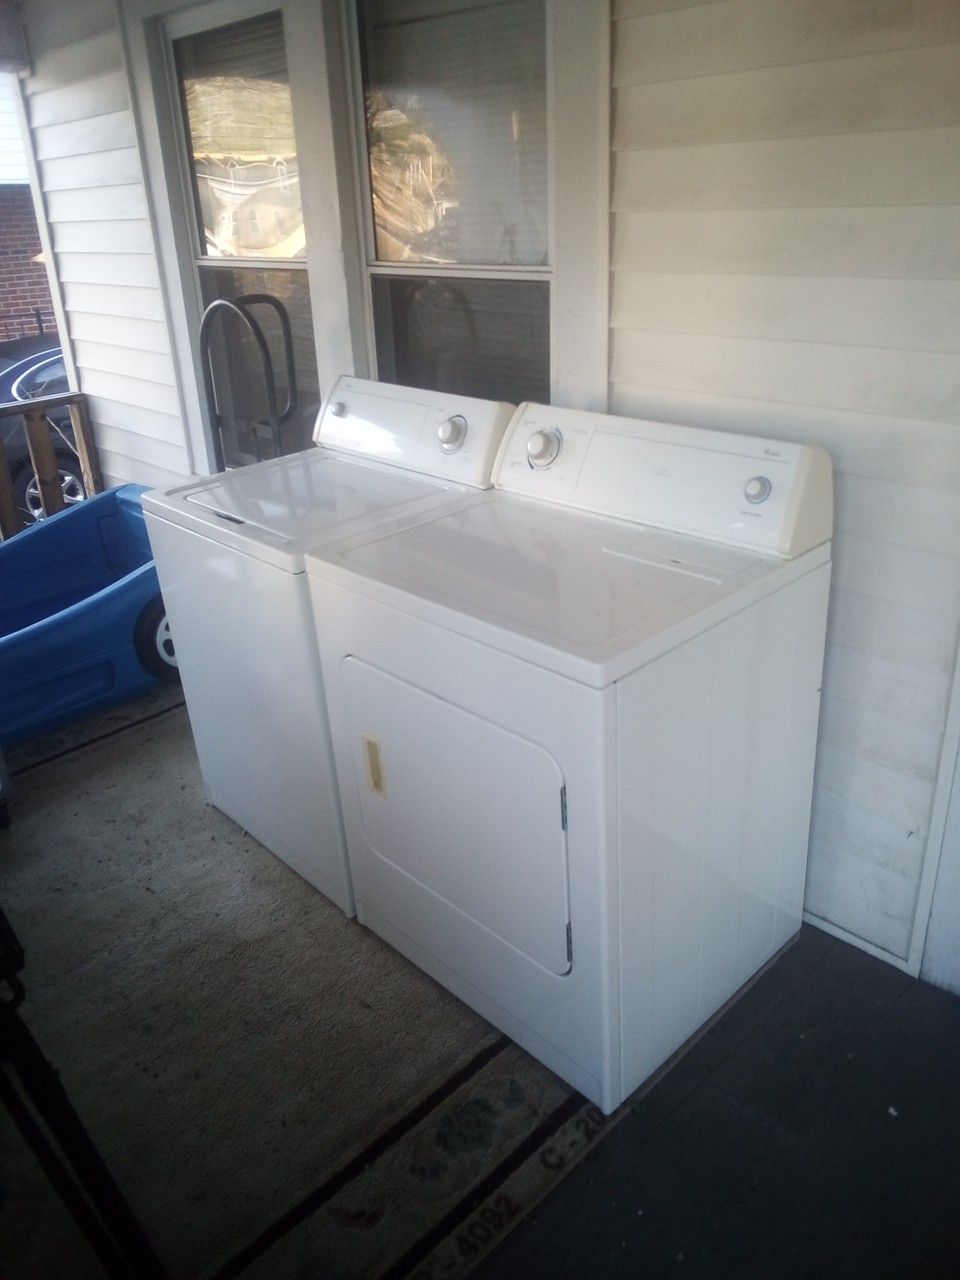 Whirlpool Commercial quality Extra large Capacity washer and dryer set! Both work great! ( 2 week money back guarantee!)